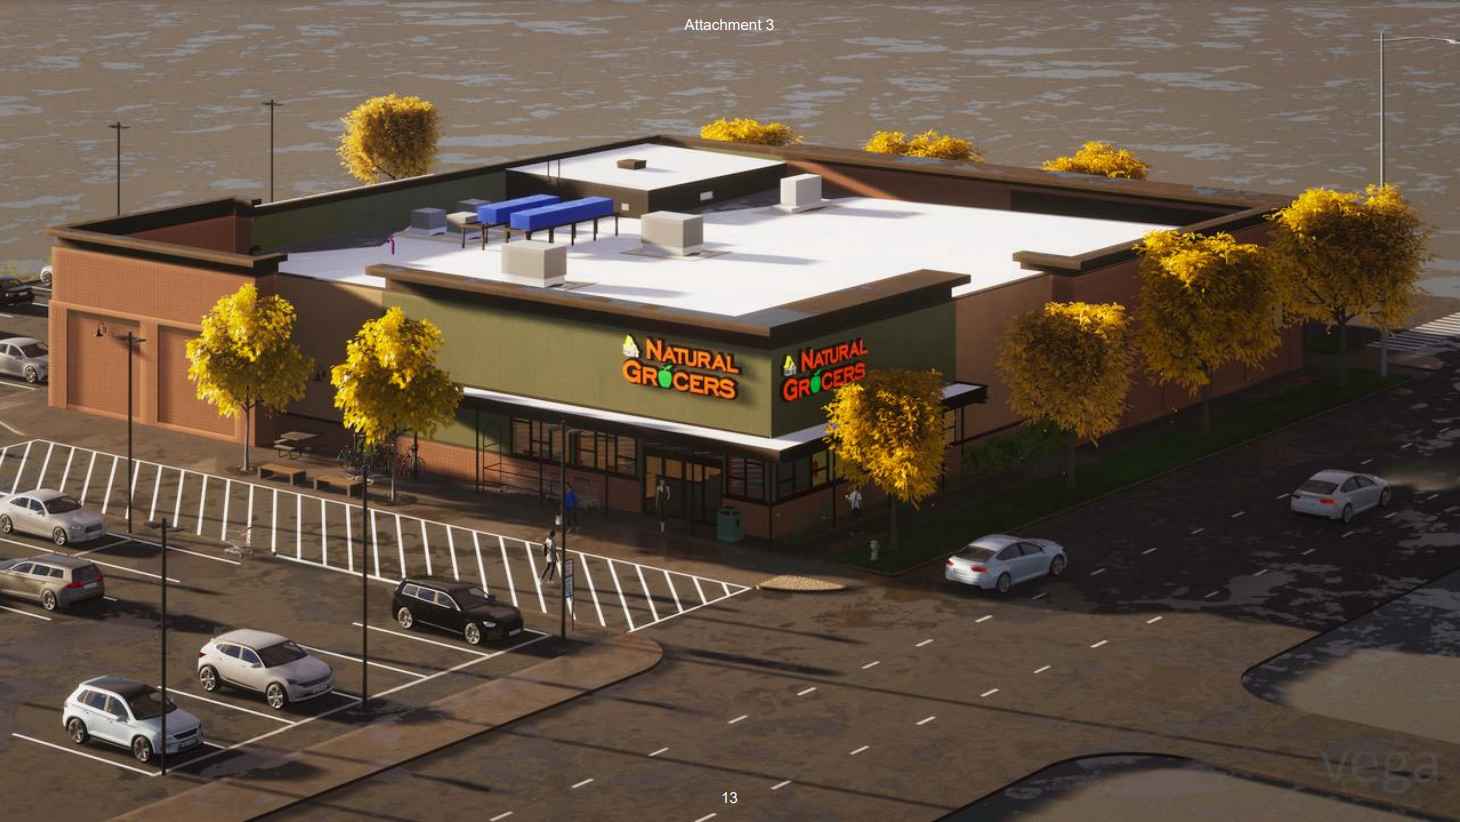 The planned Loveland Natural Grocers location